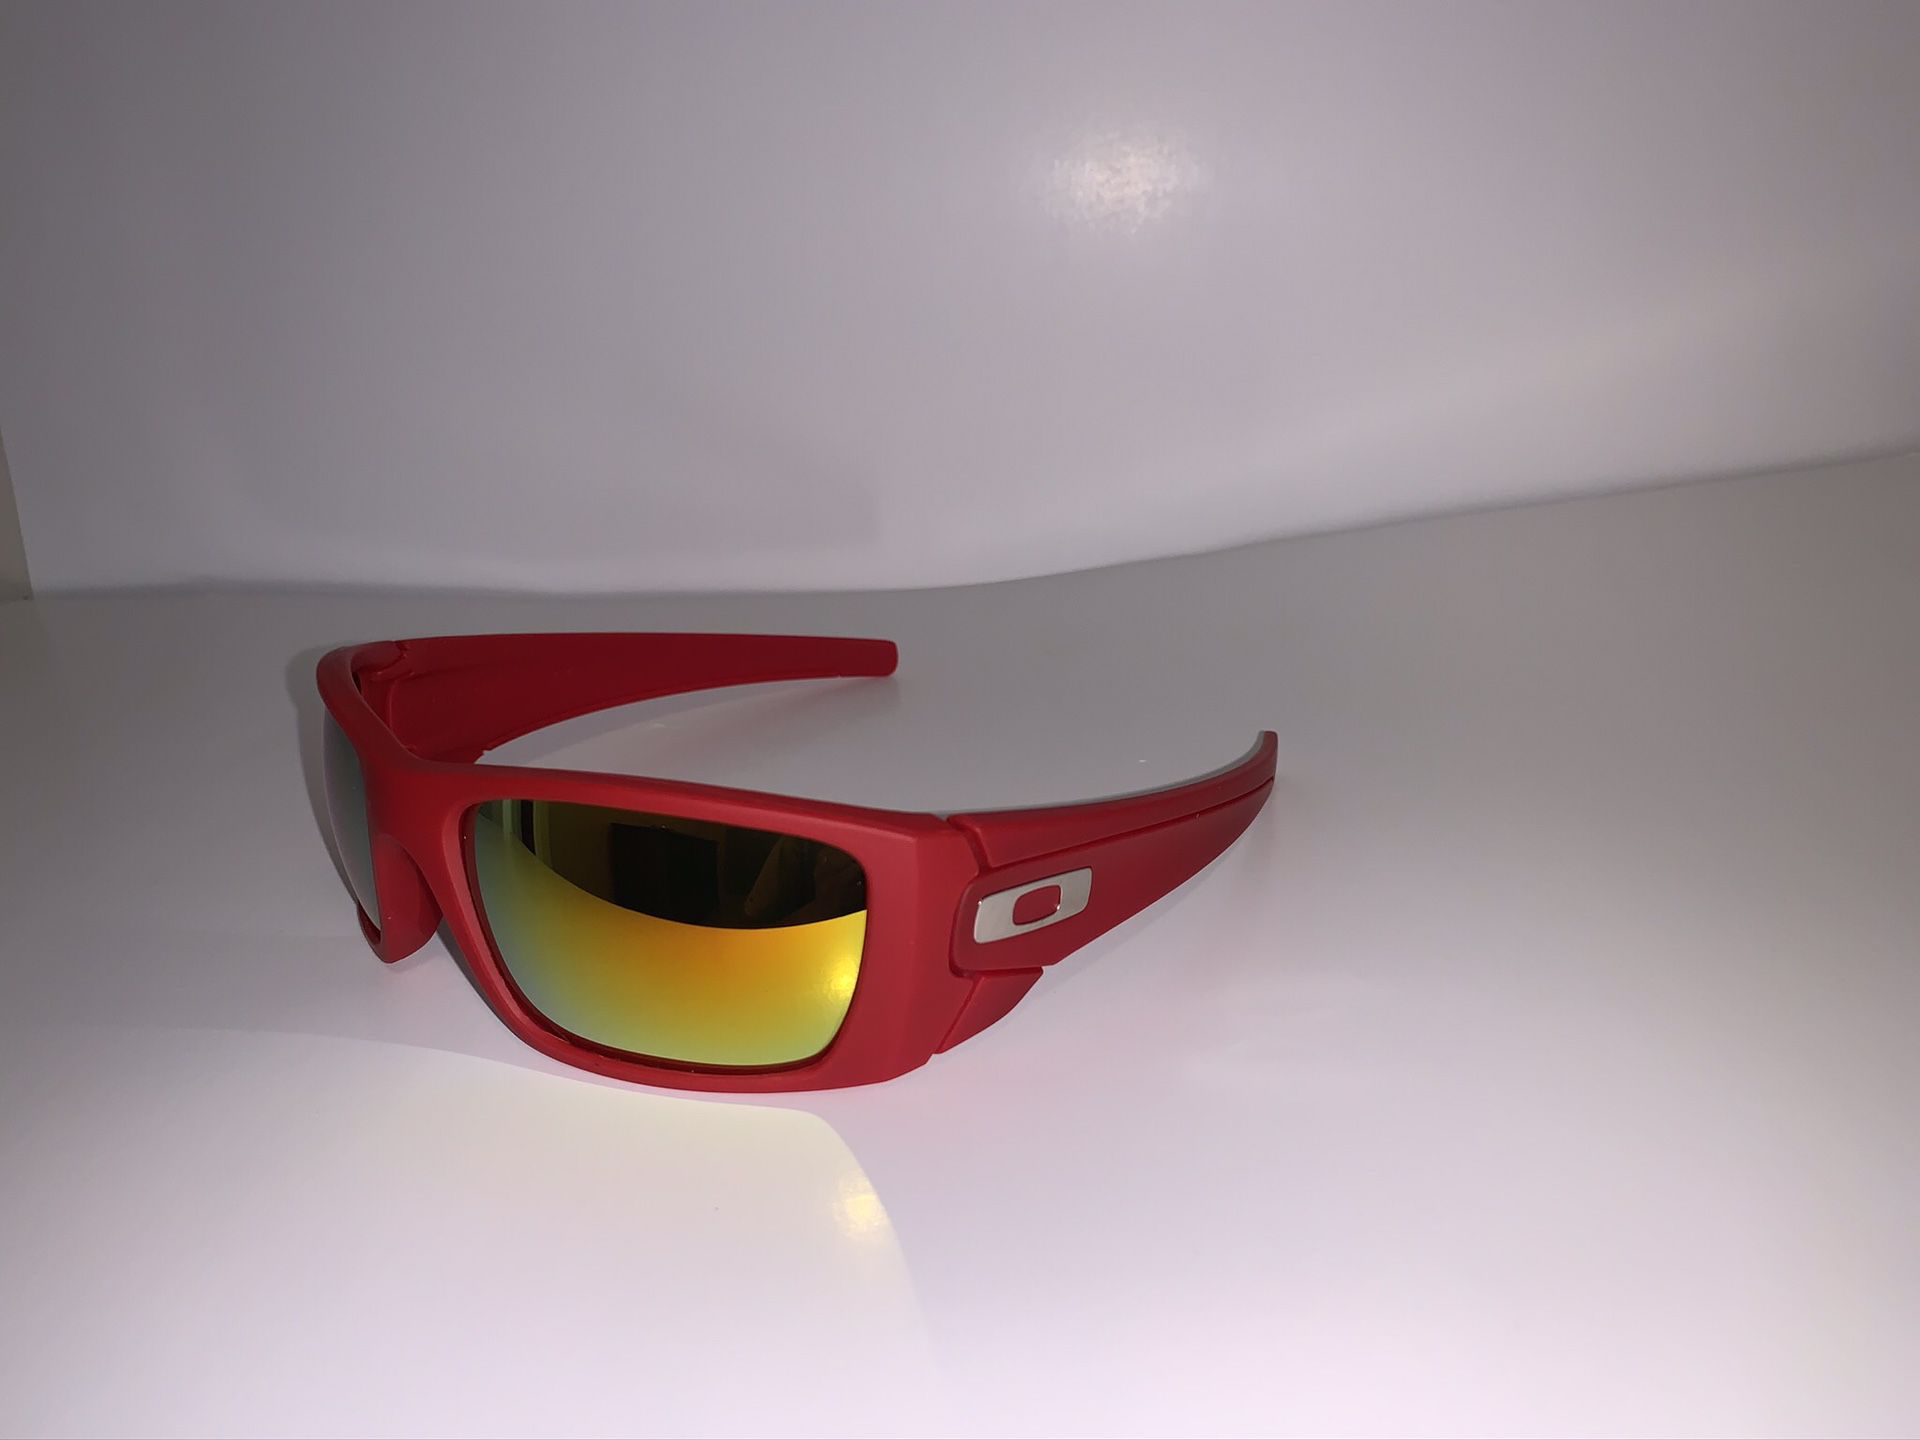 Fuel Cell sunglasses 😎